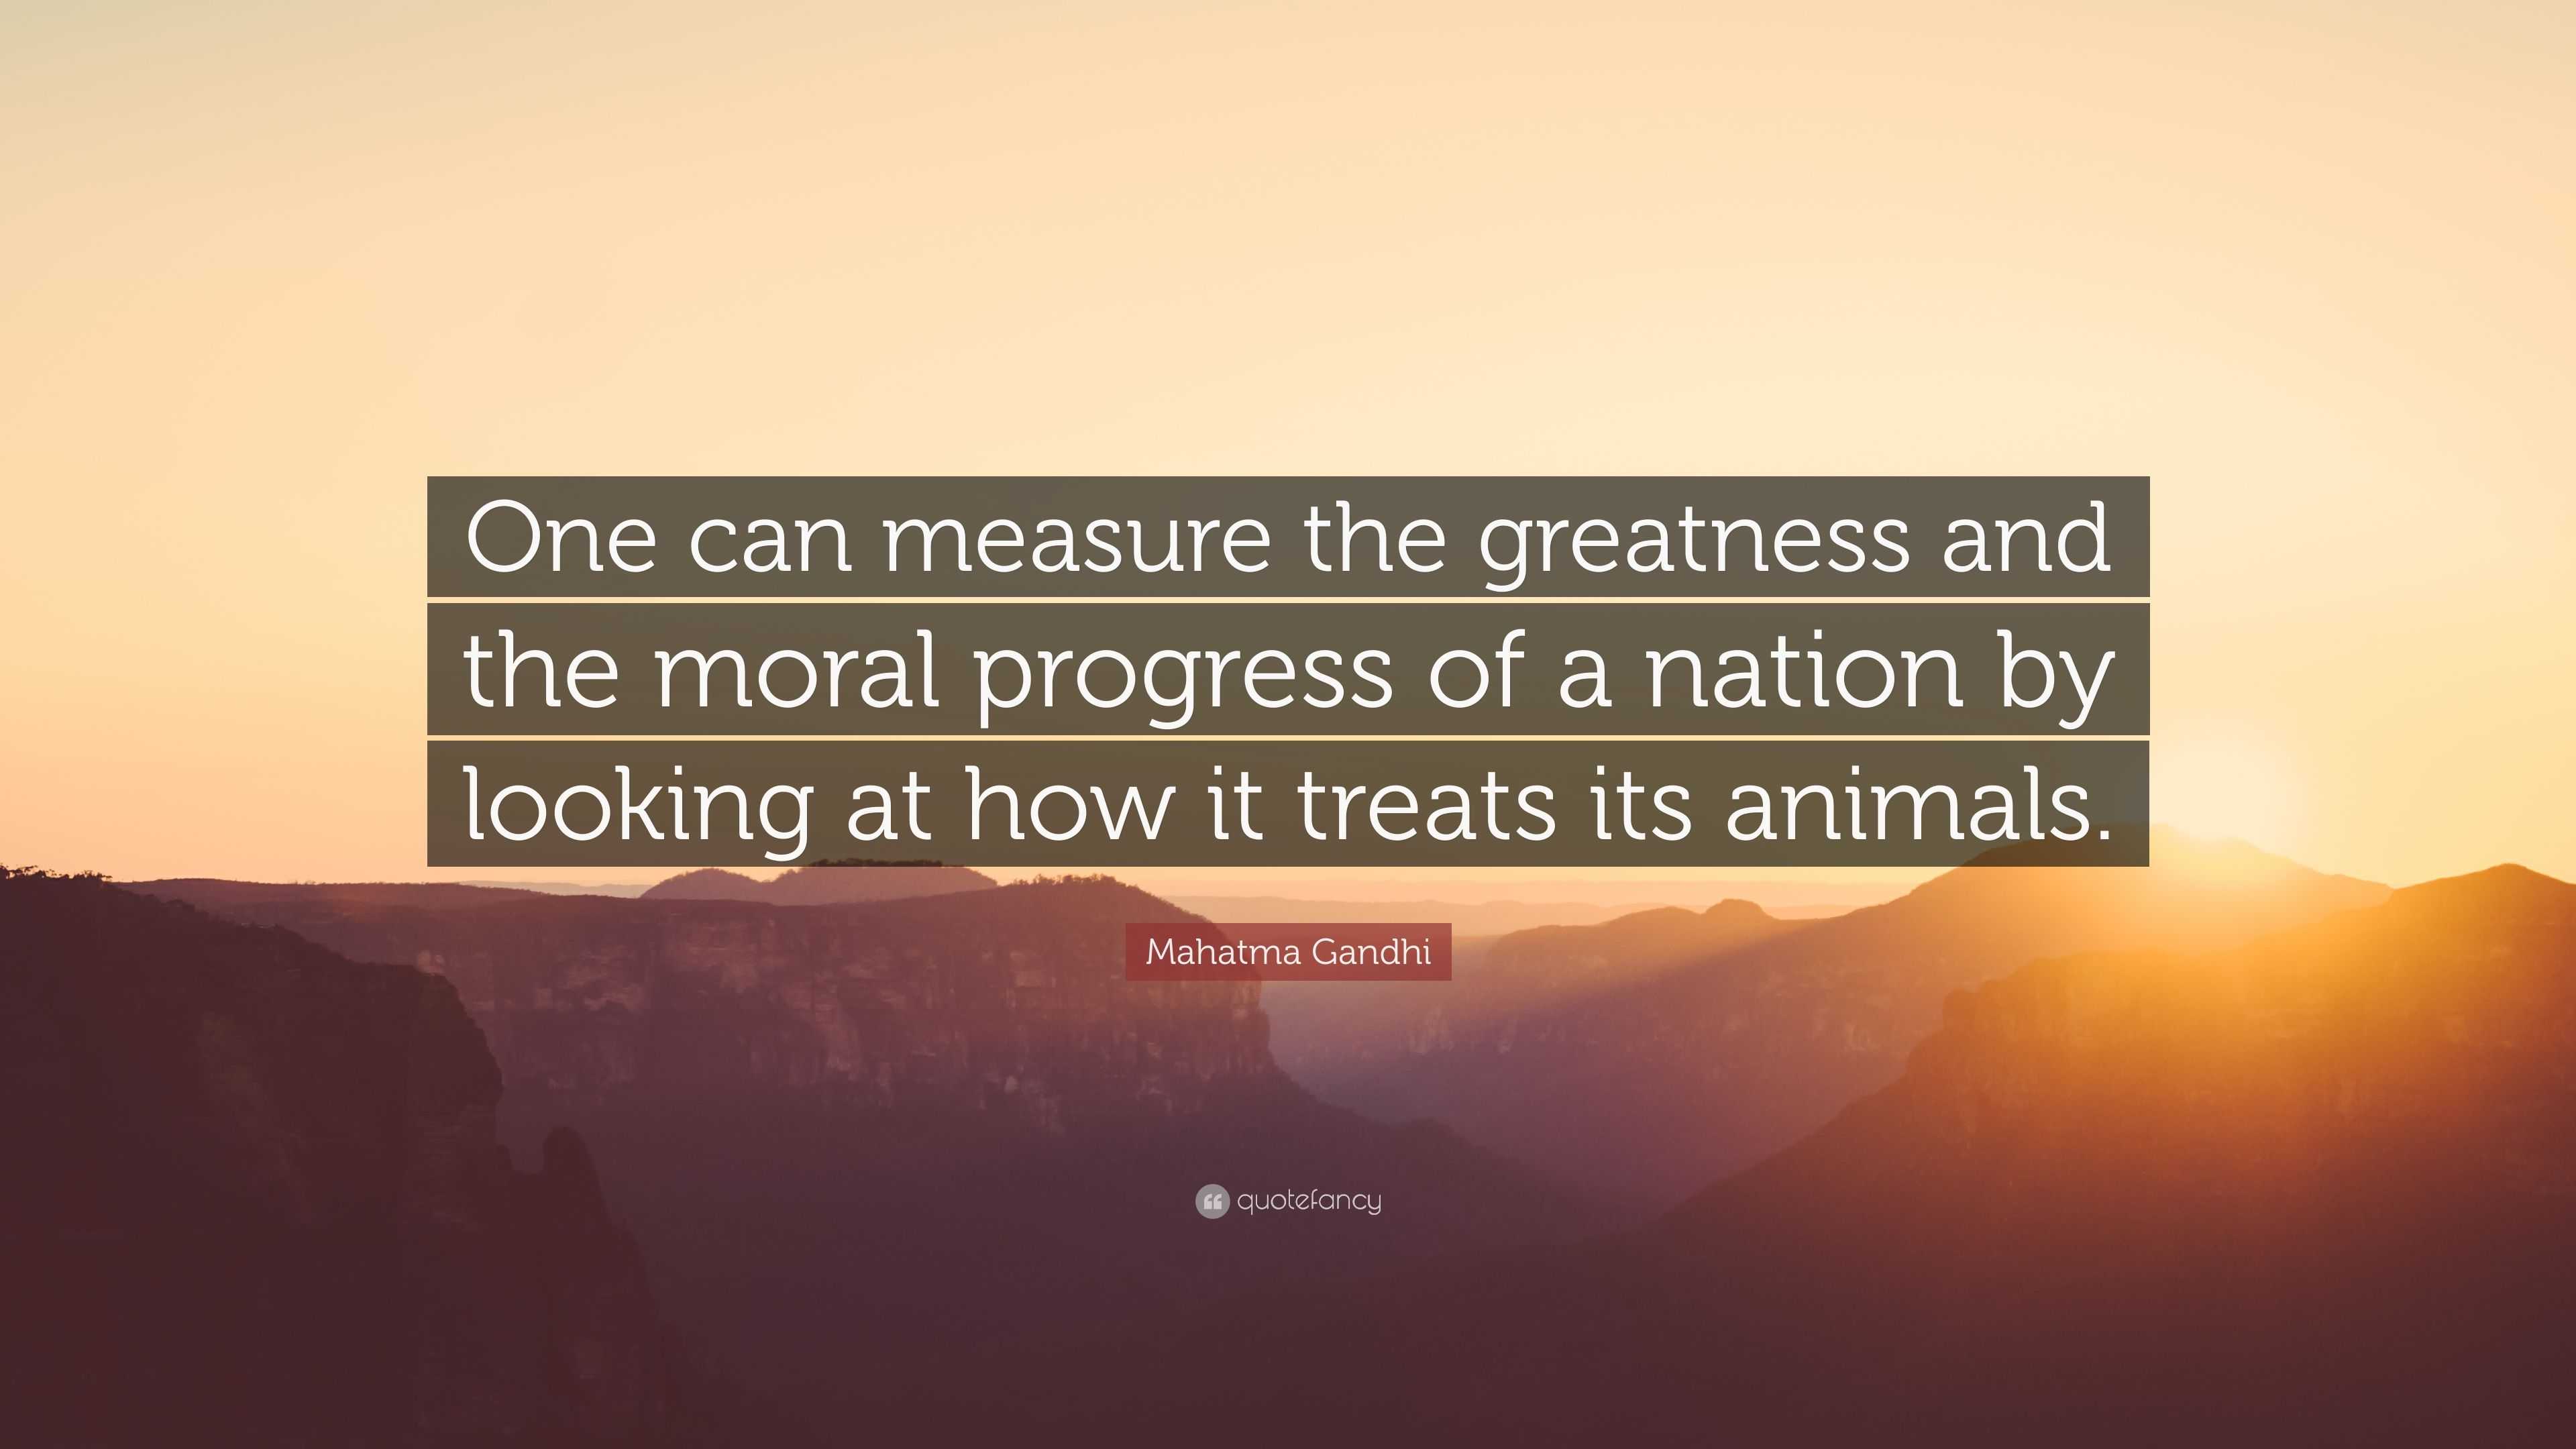 Mahatma Gandhi Quote: “One can measure the greatness and the moral progress  of a nation by